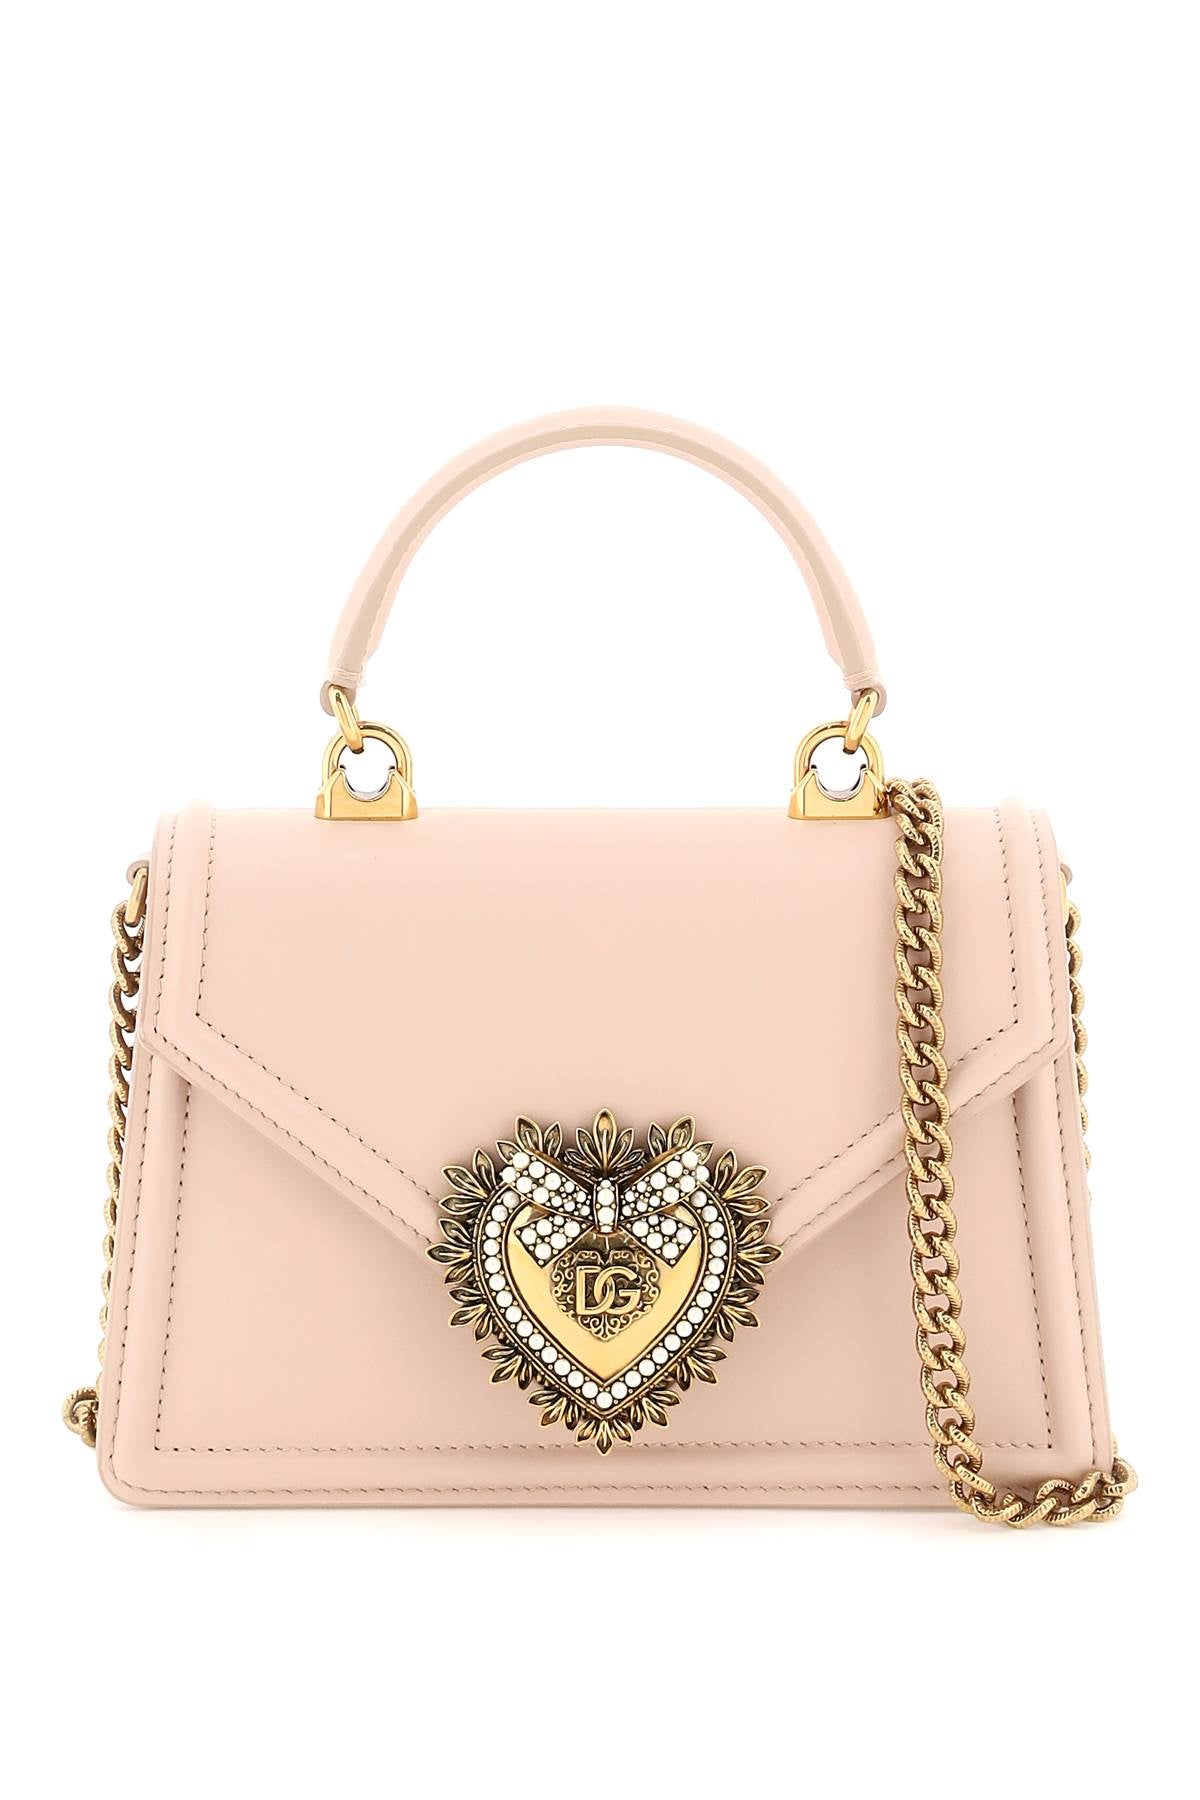 Shop Dolce & Gabbana Luxurious Pale Pink Leather Mini-handbag With Embellished Applique